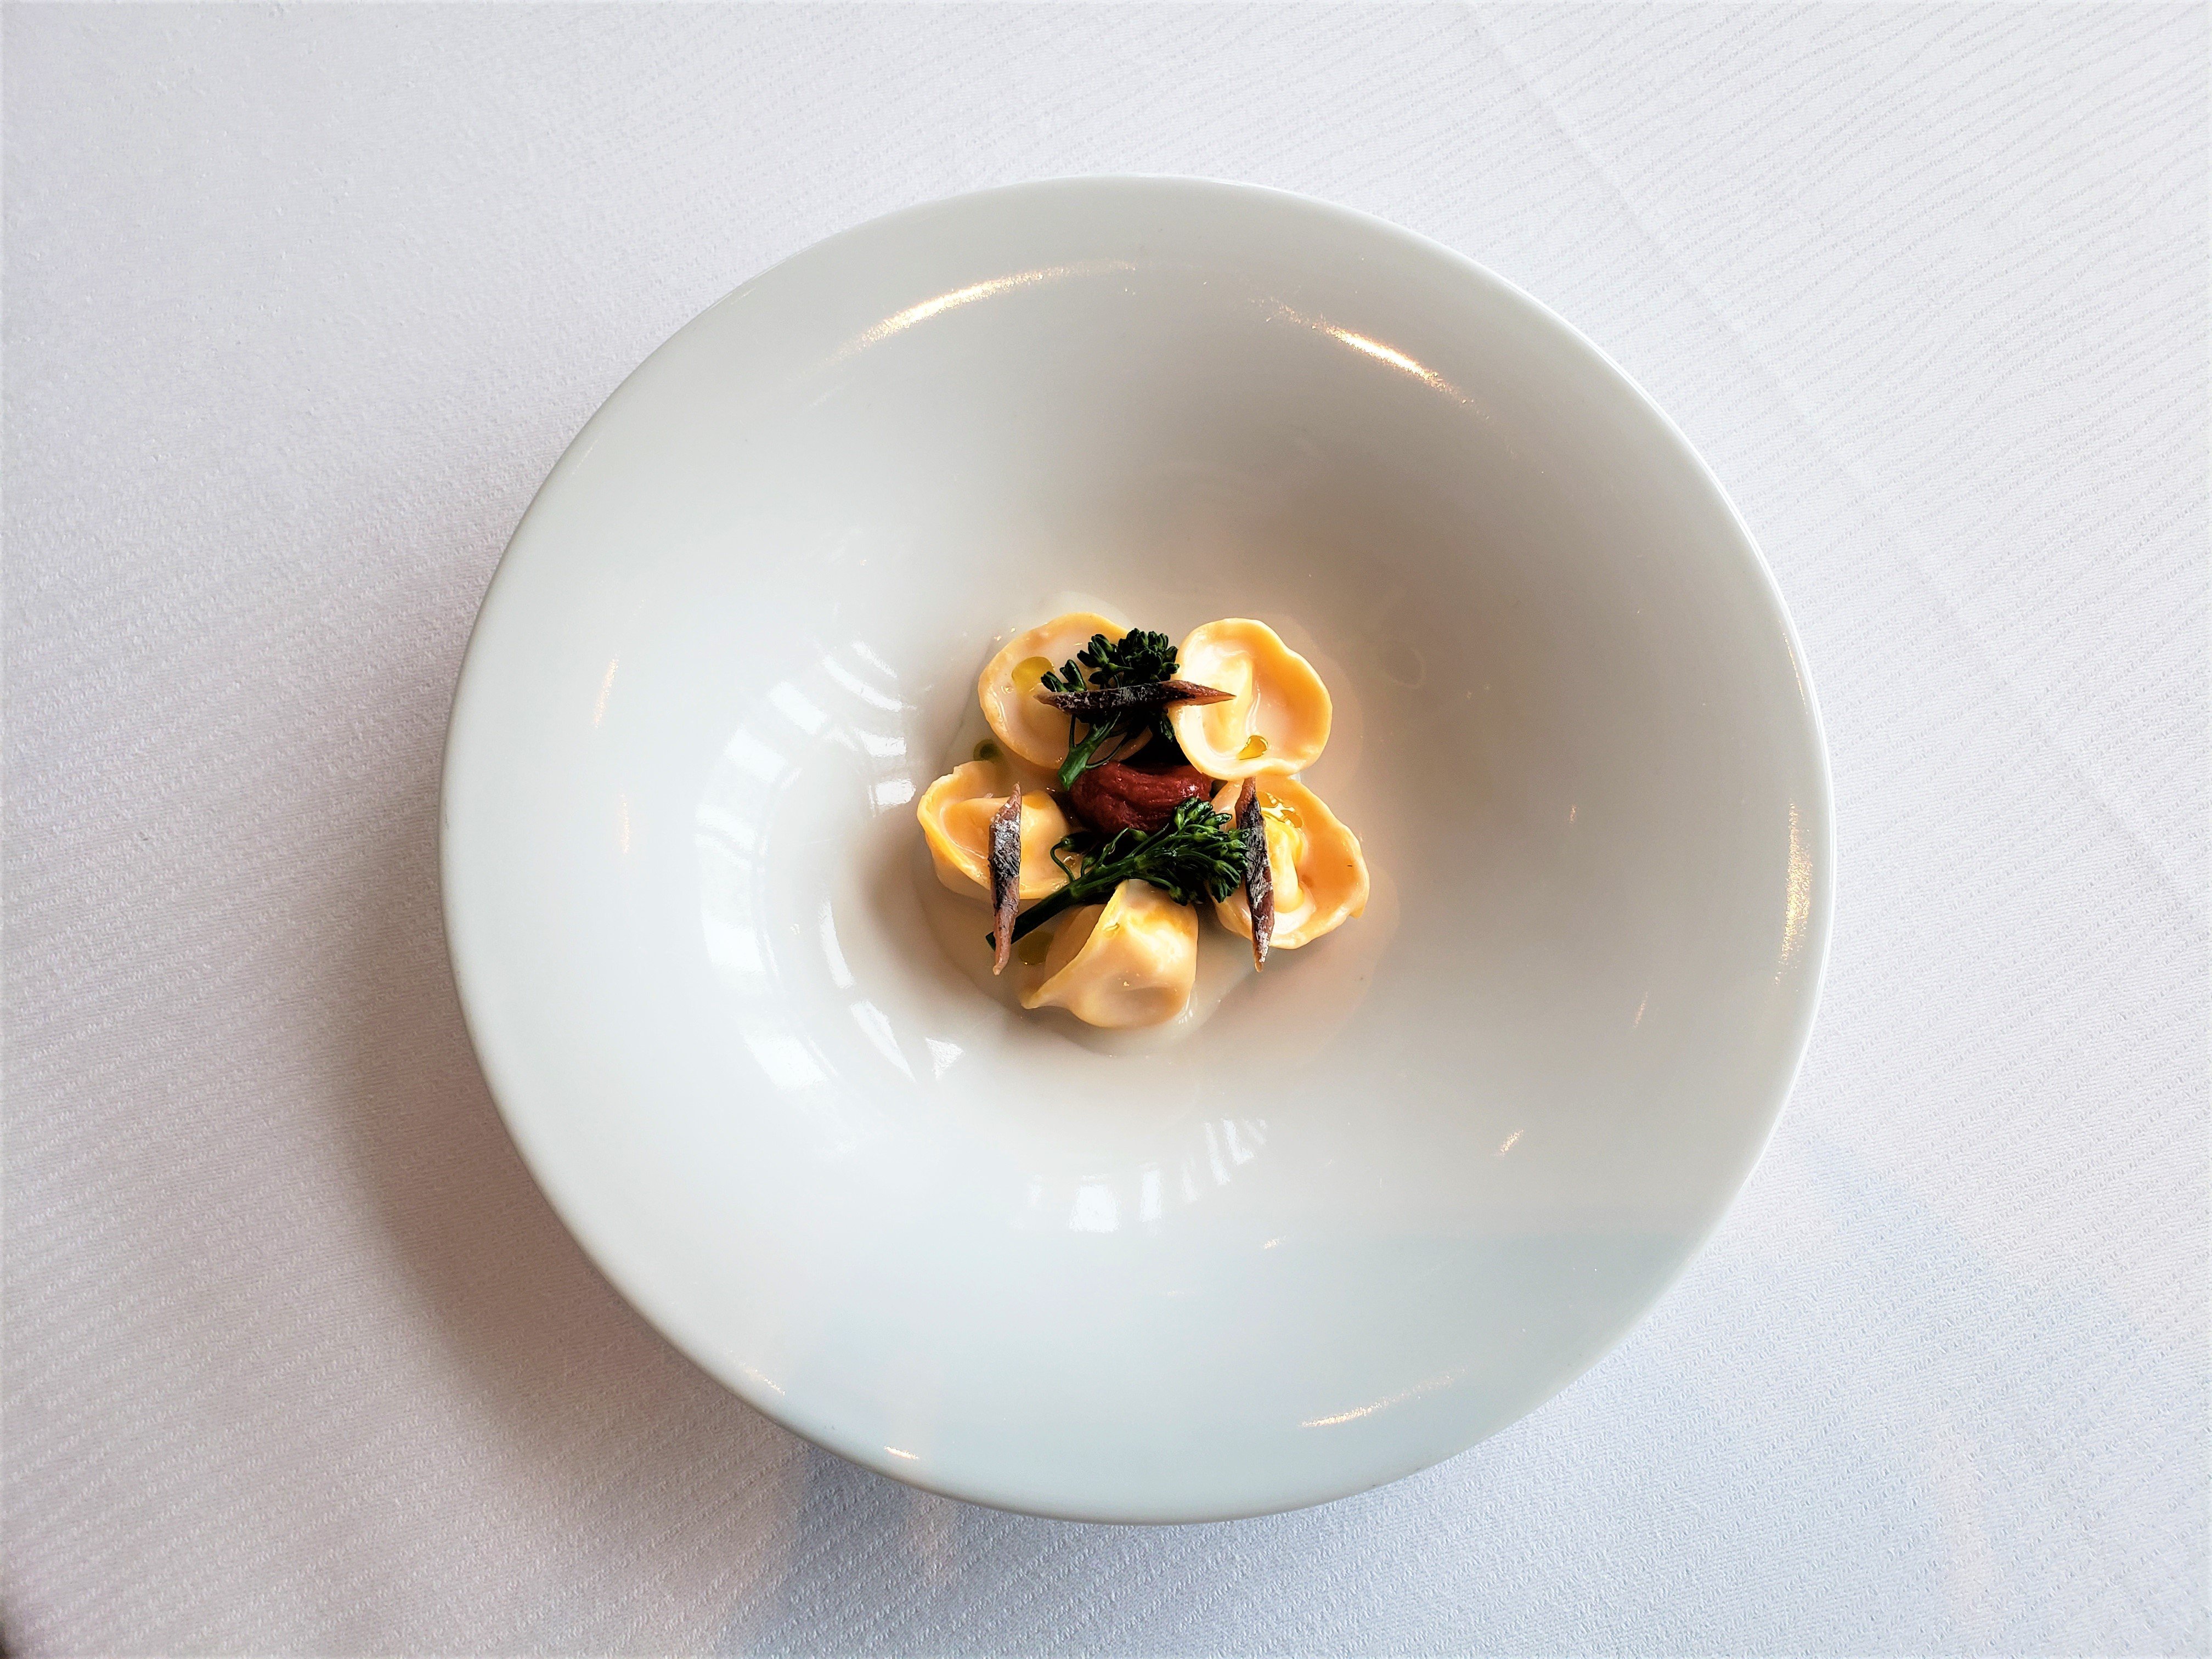 The results of Russo’s labours: a fully finished dish of tempting tortellini. Photos: Aydee Tie